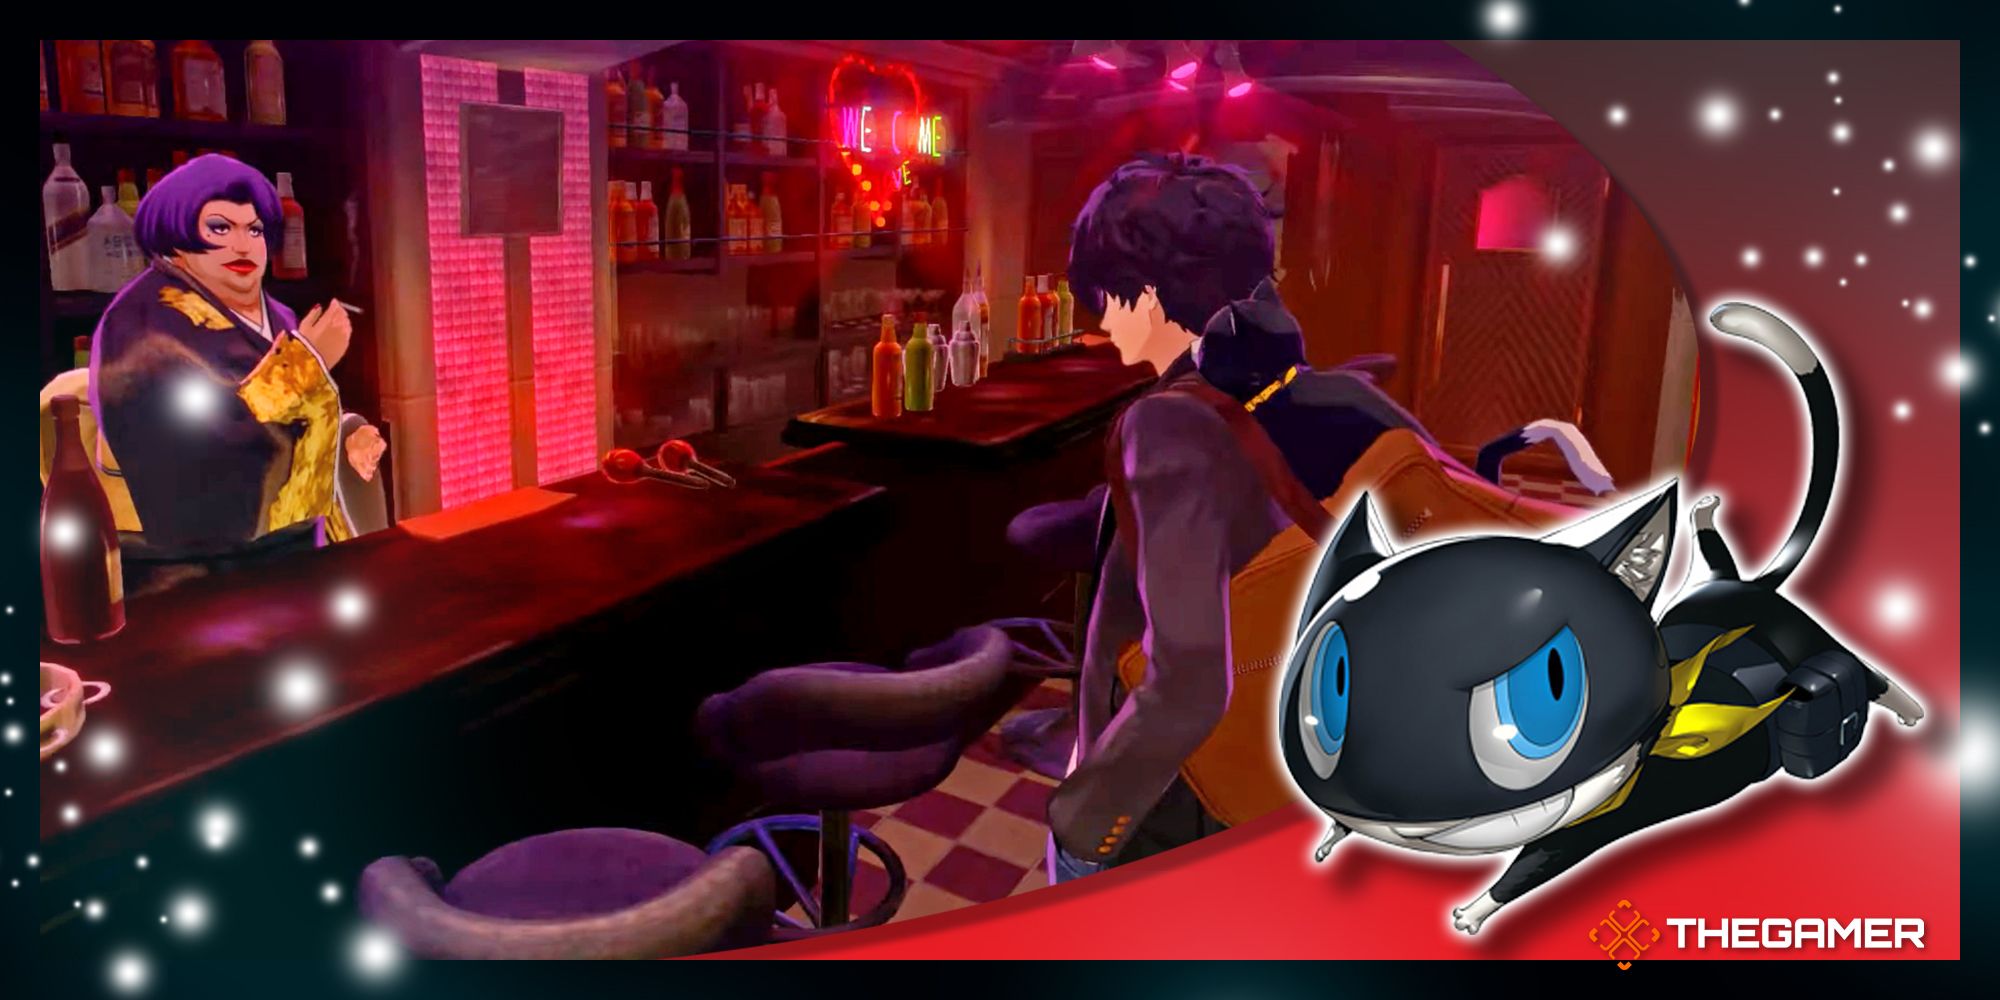 Screens and art from Persona 5 Royal.